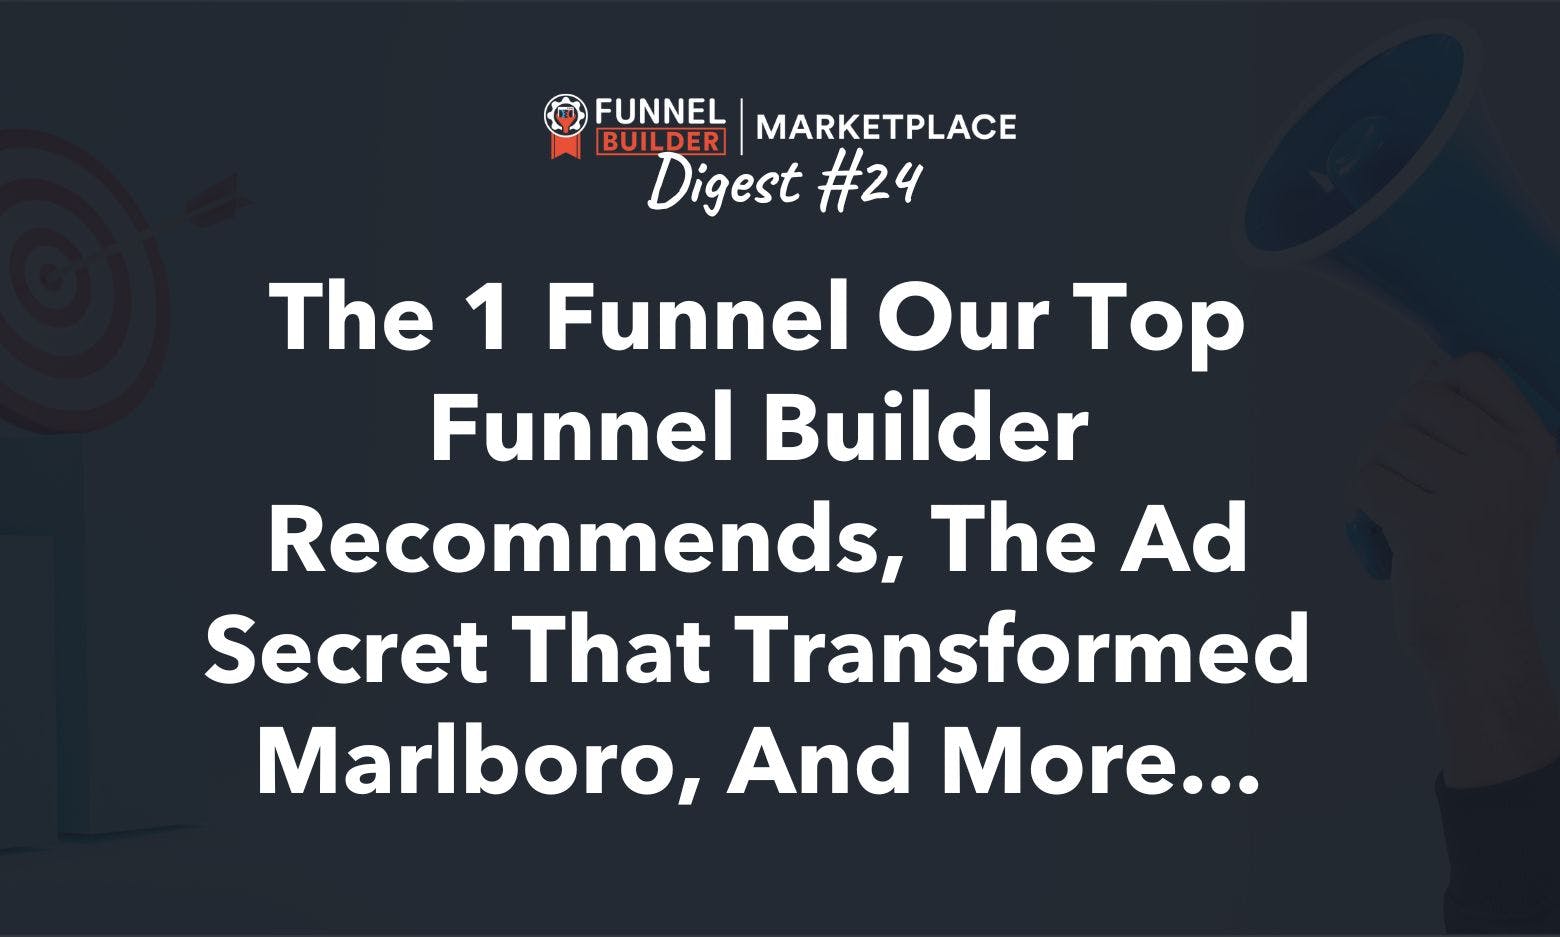 FBM Digest #24: The 1 funnel our top funnel builder recommends, the ad secret that transformed Marlboro, and more...